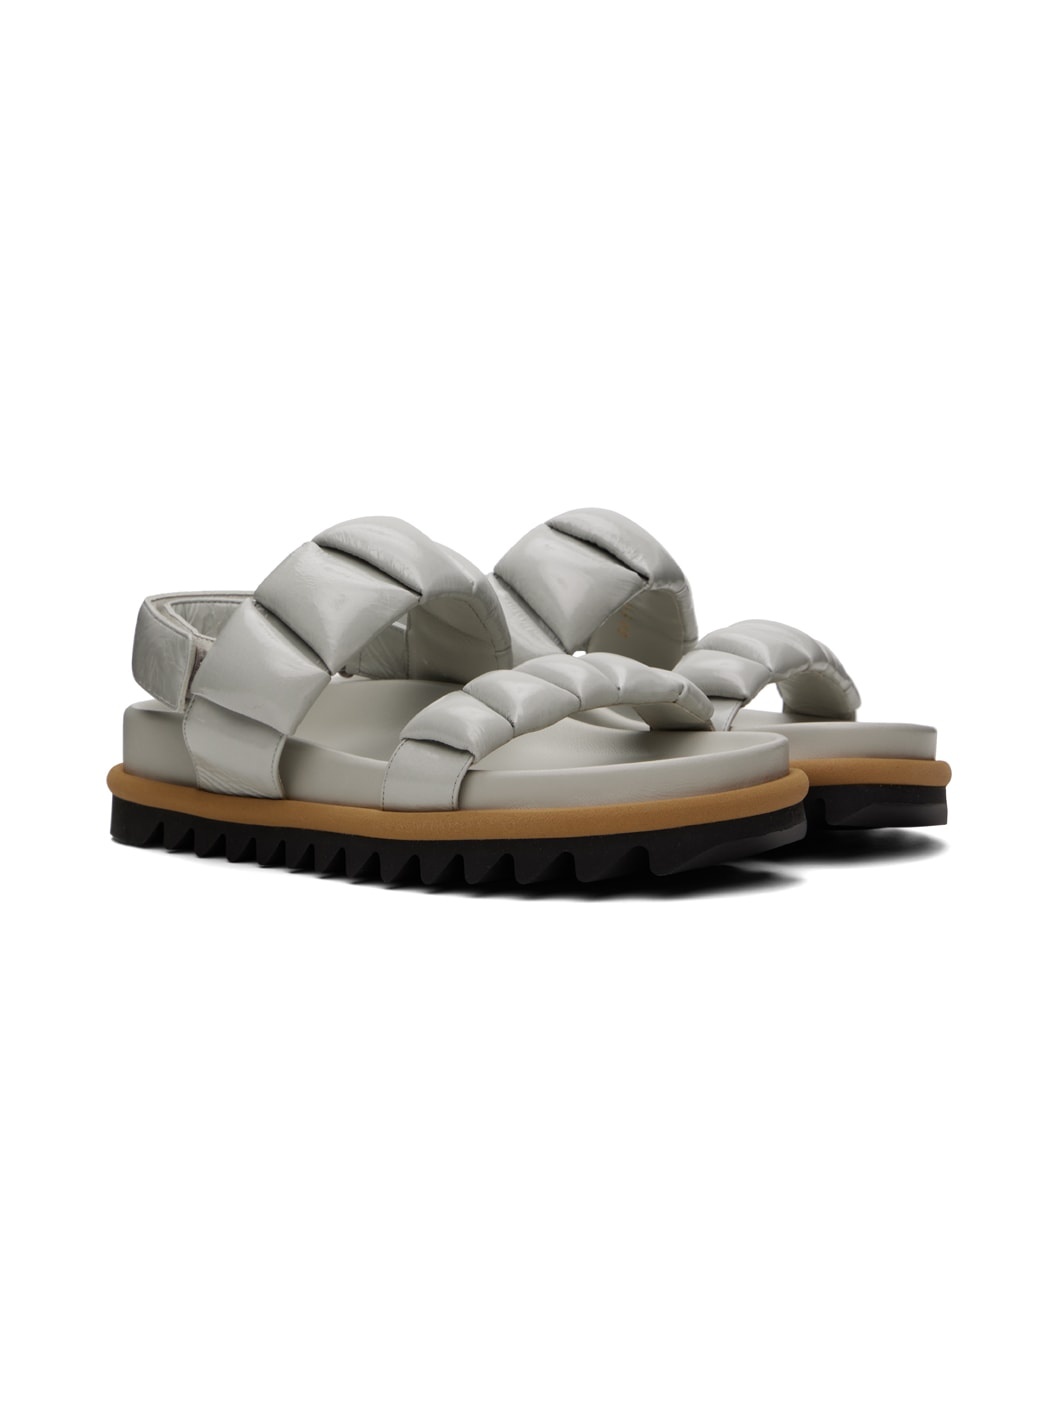 Off-White Padded Leather Sandals - 4